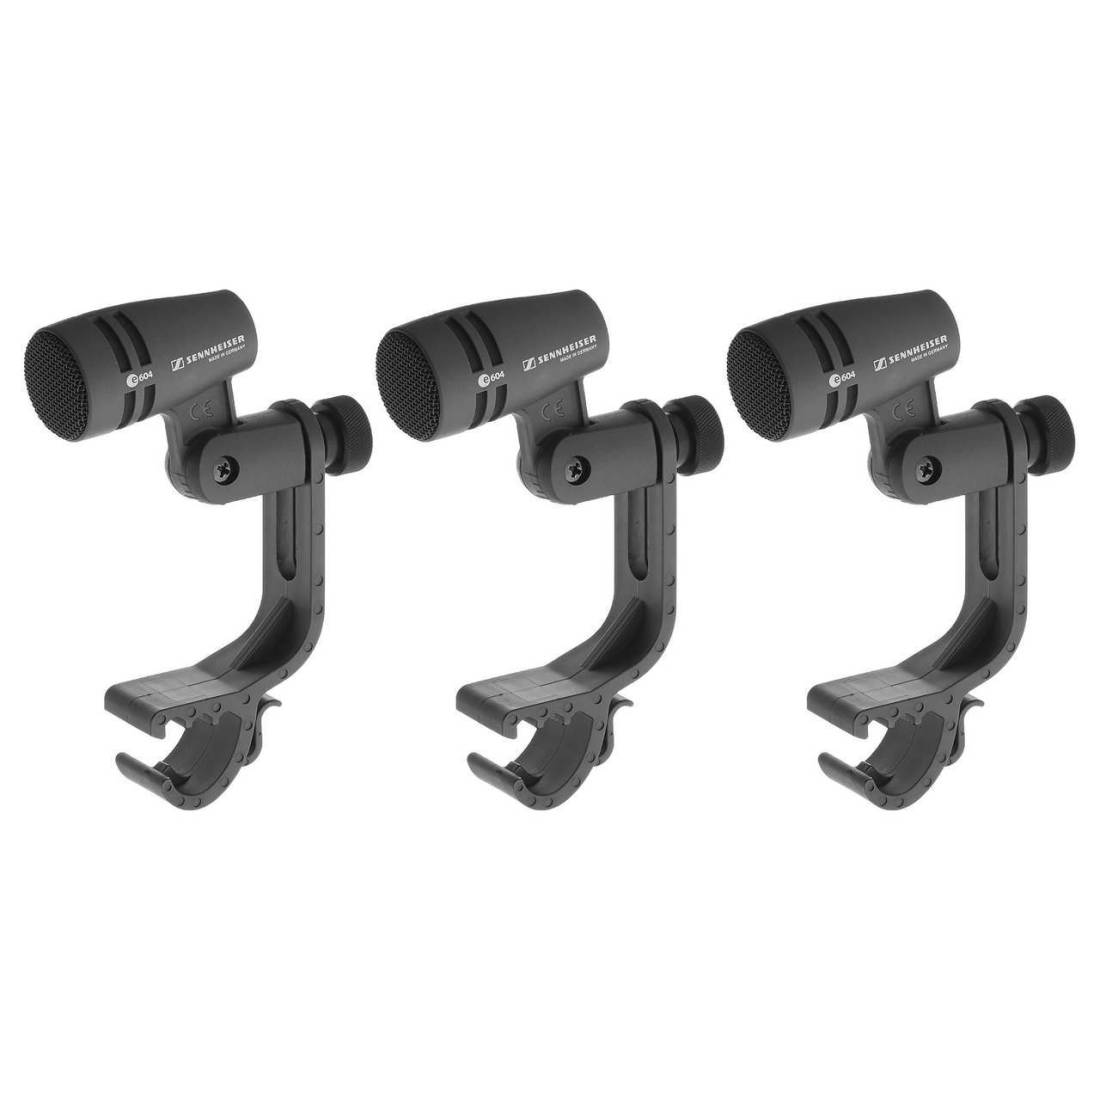 3-Pack of e604 Microphones